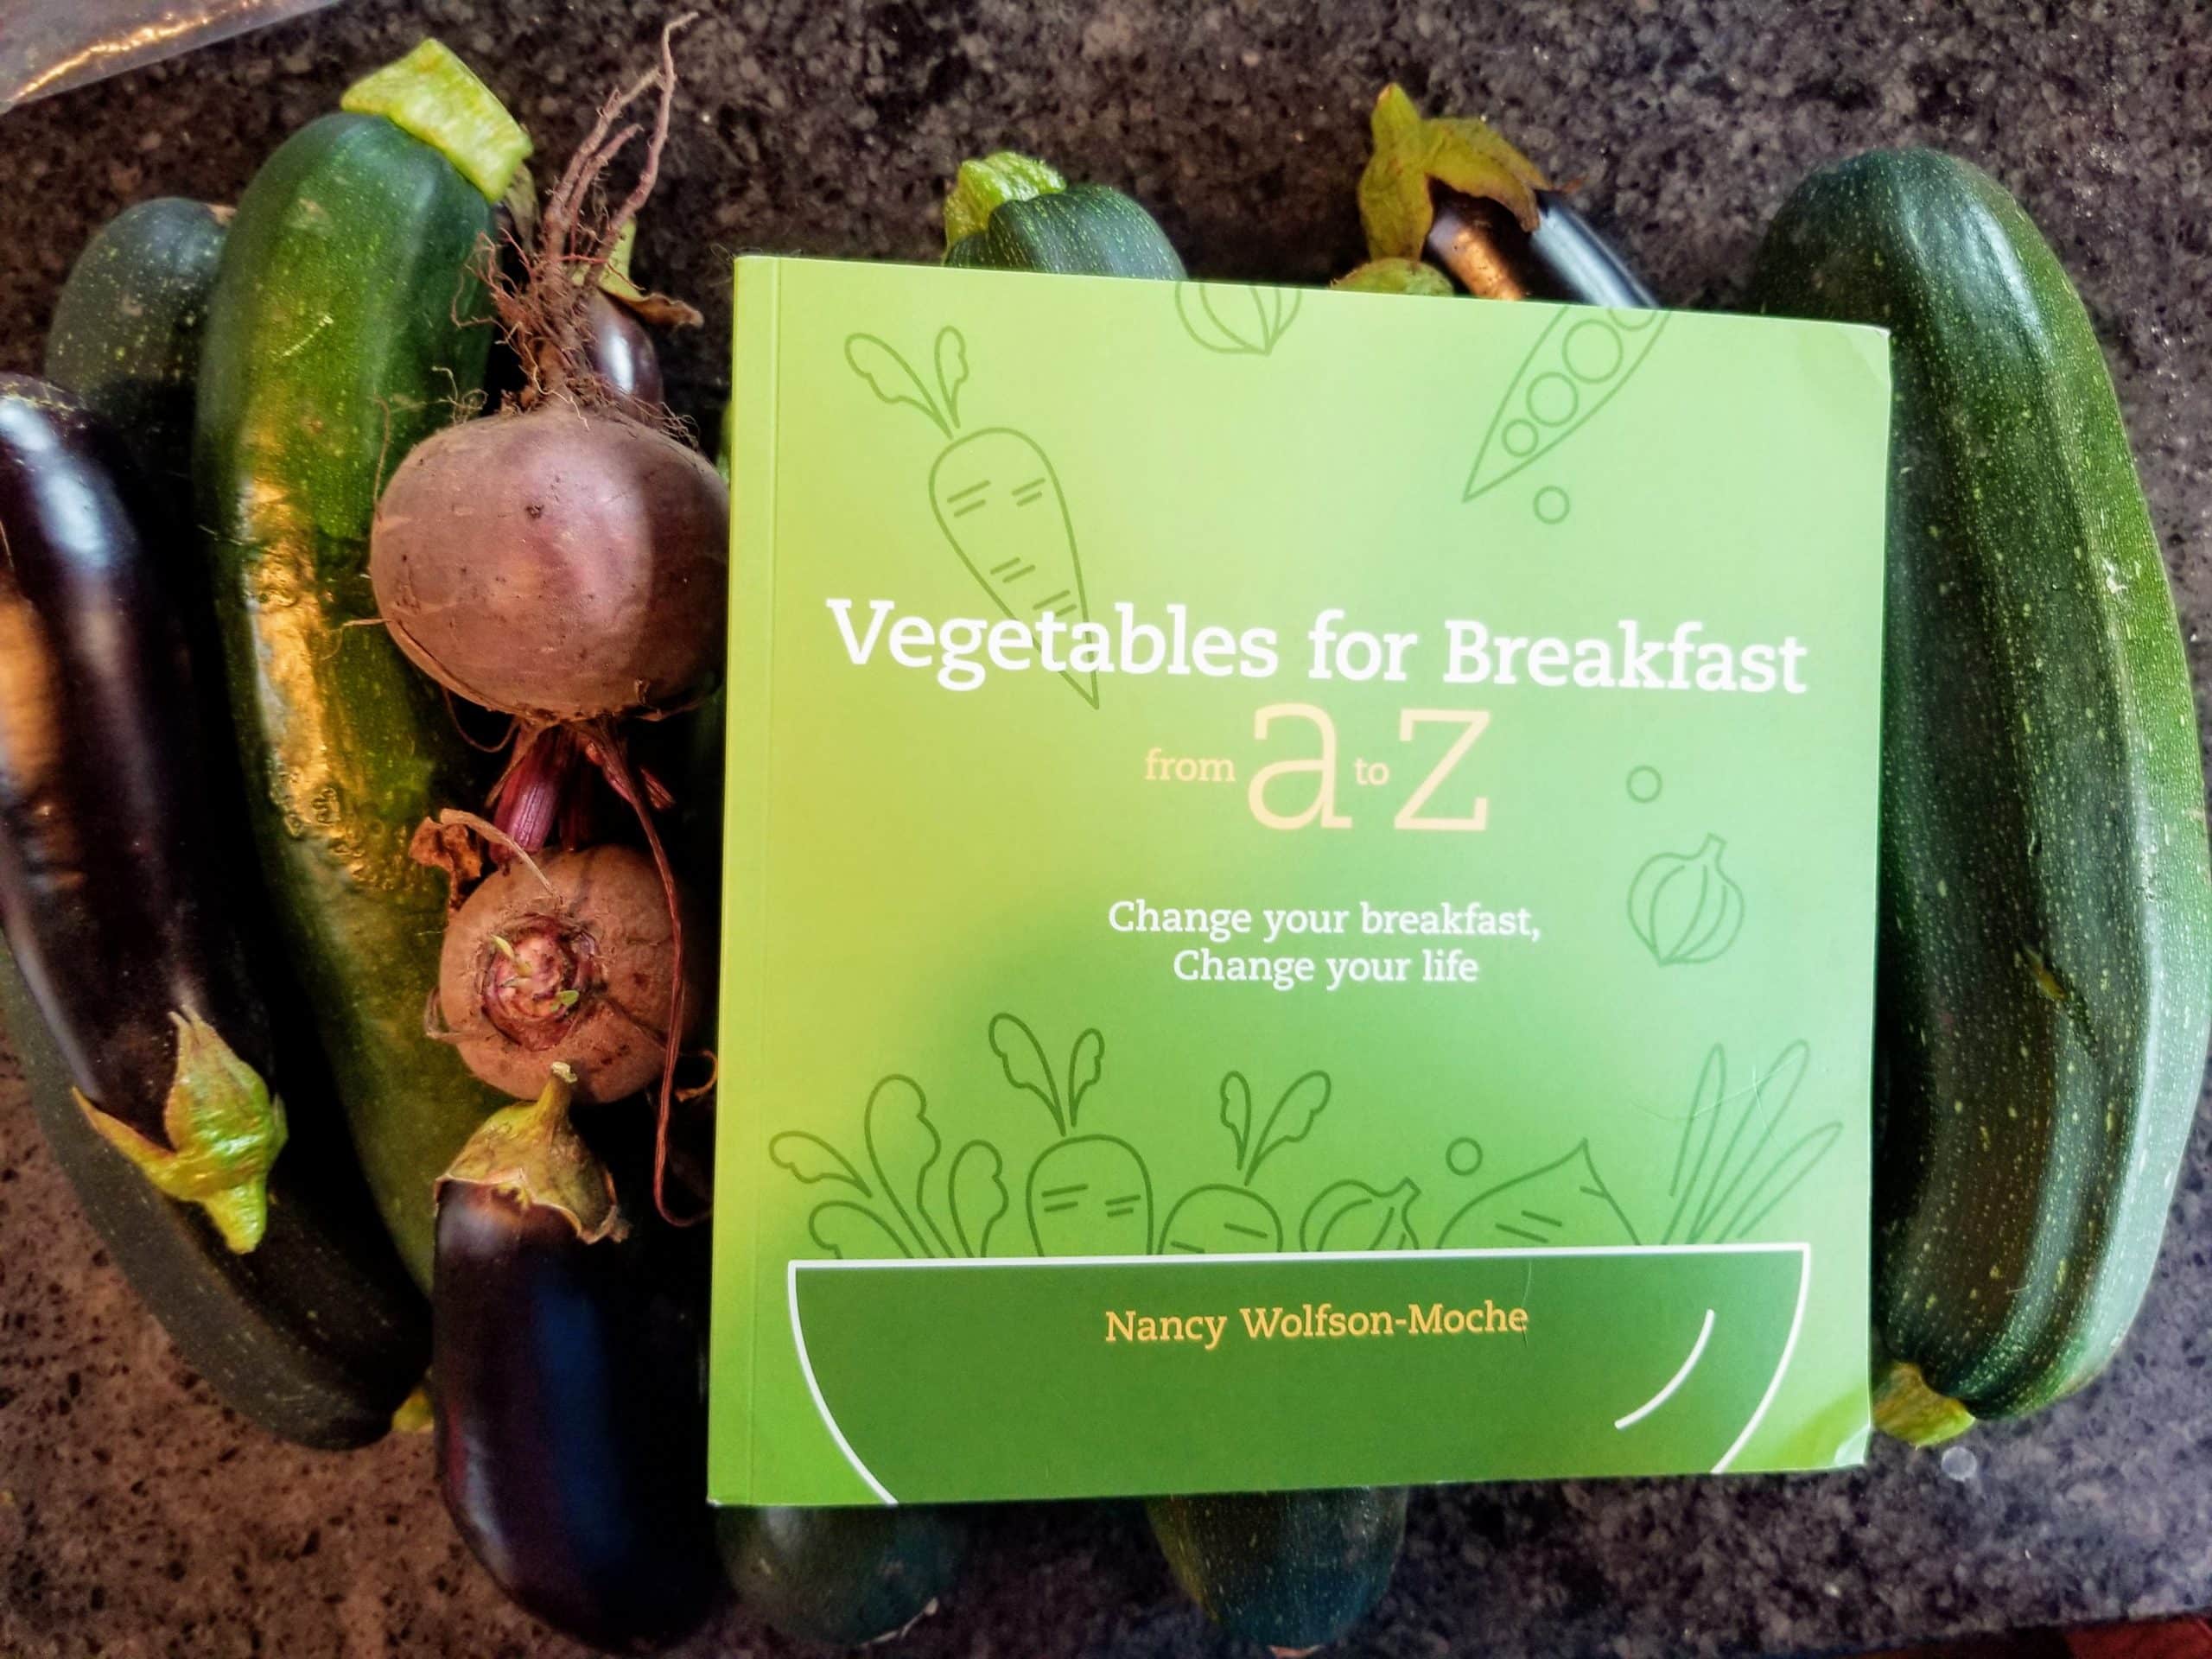 Vegetables for Breakfast by Nancy Wolfson-Moche – Cookbook Review with Carrot Recipe